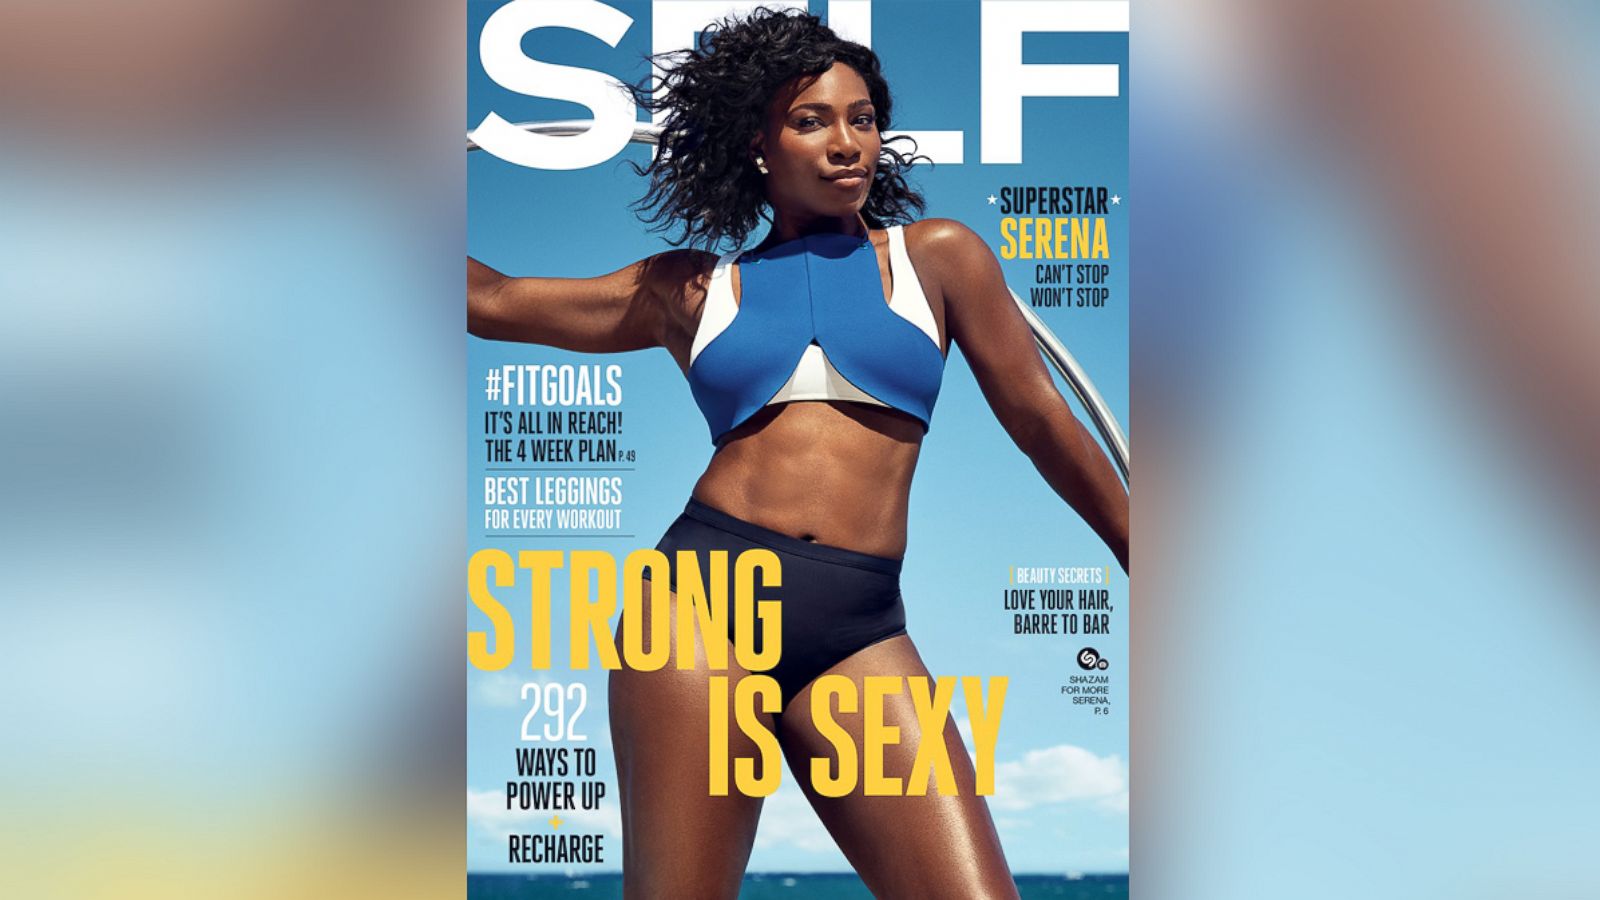 A Bra Can't Help You'- Serena Williams Reveals a Secret During